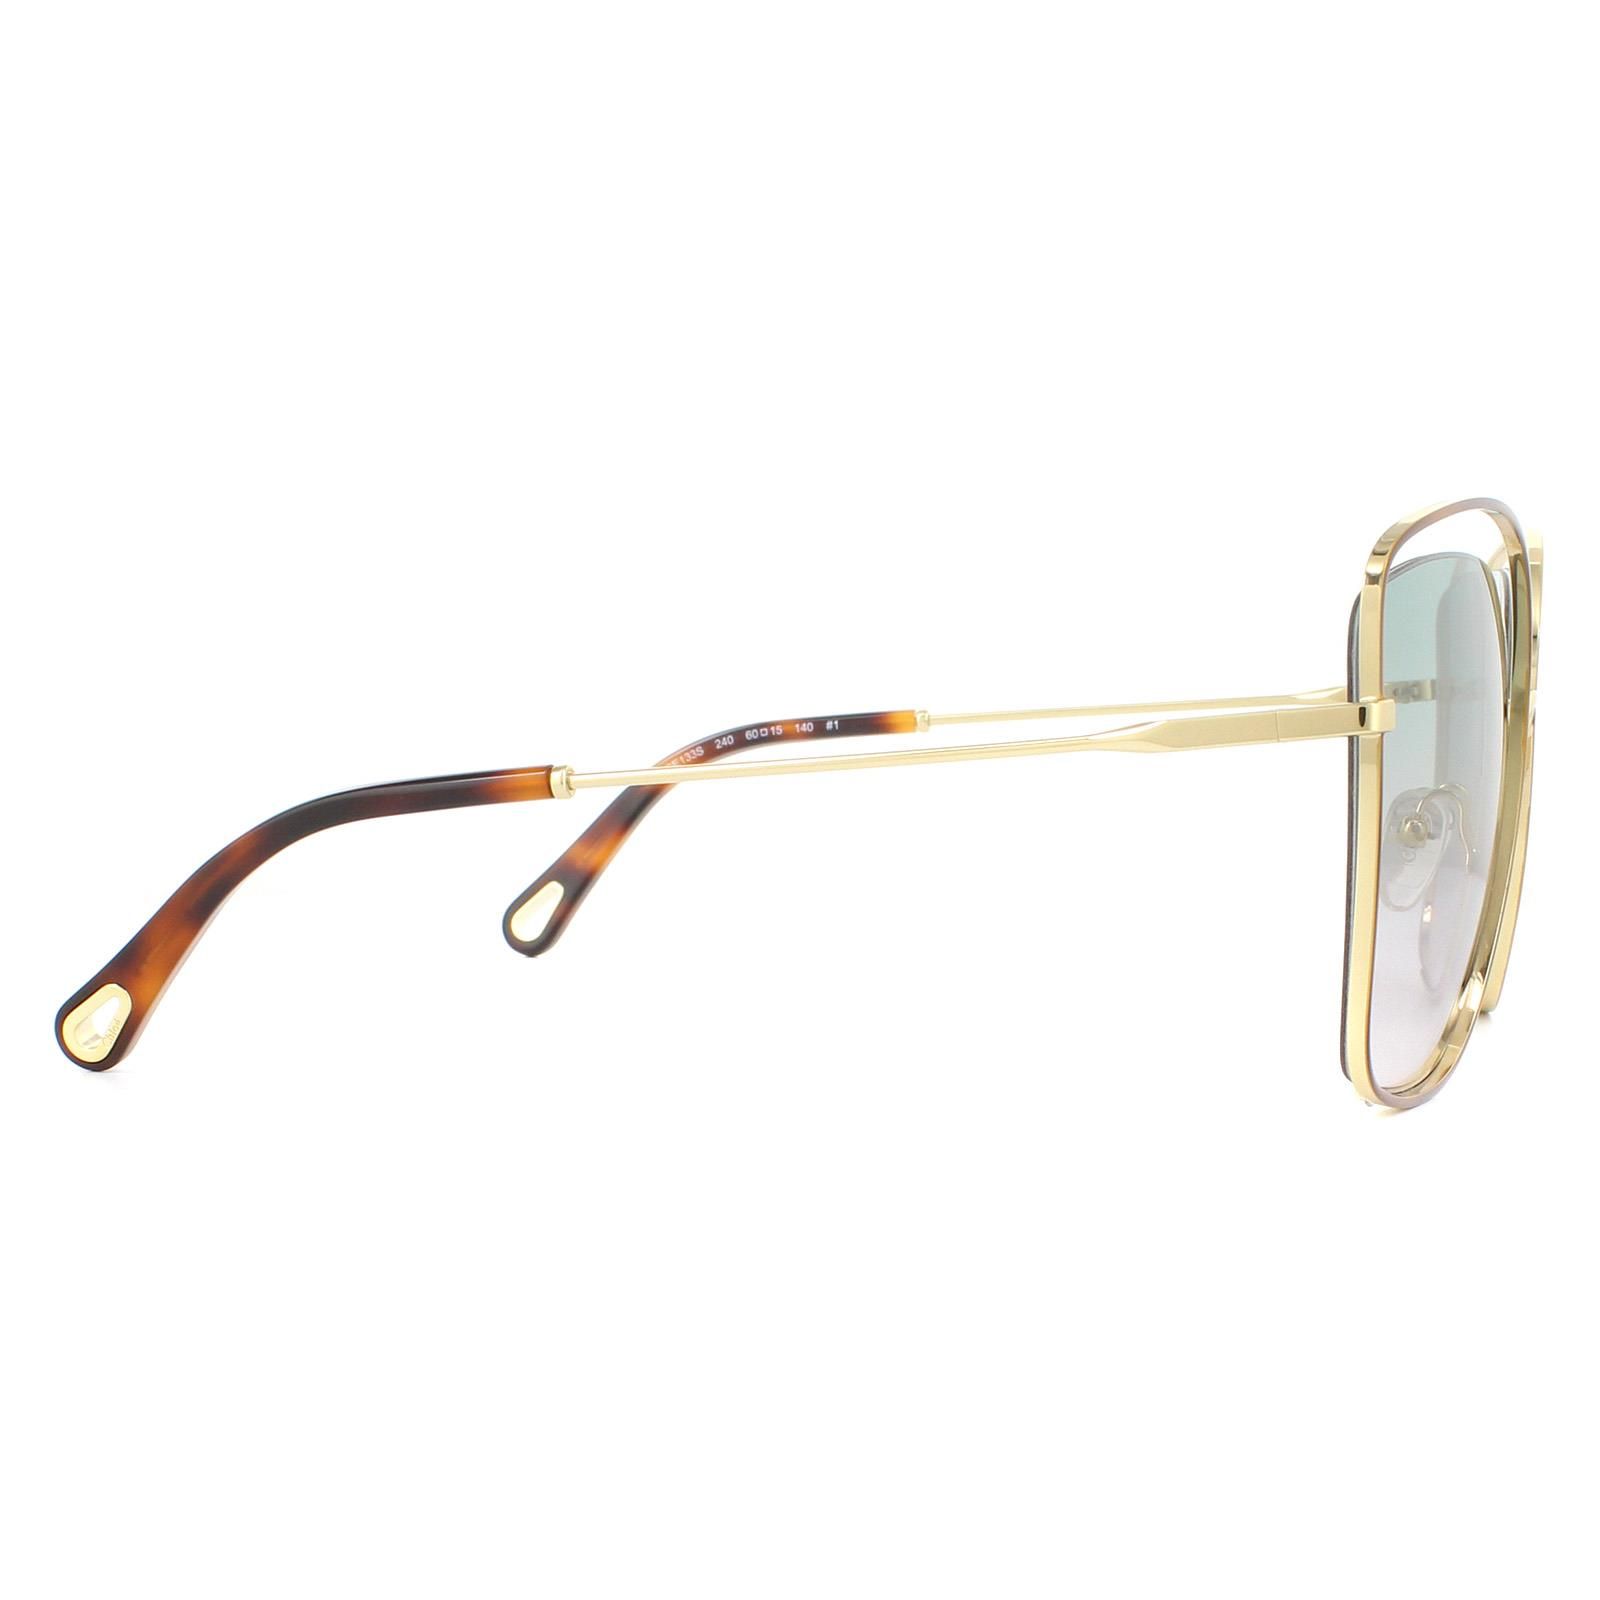 Chloe Sunglasses CE133S Poppy 240 Havana Gold Green Rose Gradient are a gorgeous style for women with large square lenses and an unusual double rim frame. Thin metal temples are tipped with plastic for comfort and feature the Chloe logo etching.